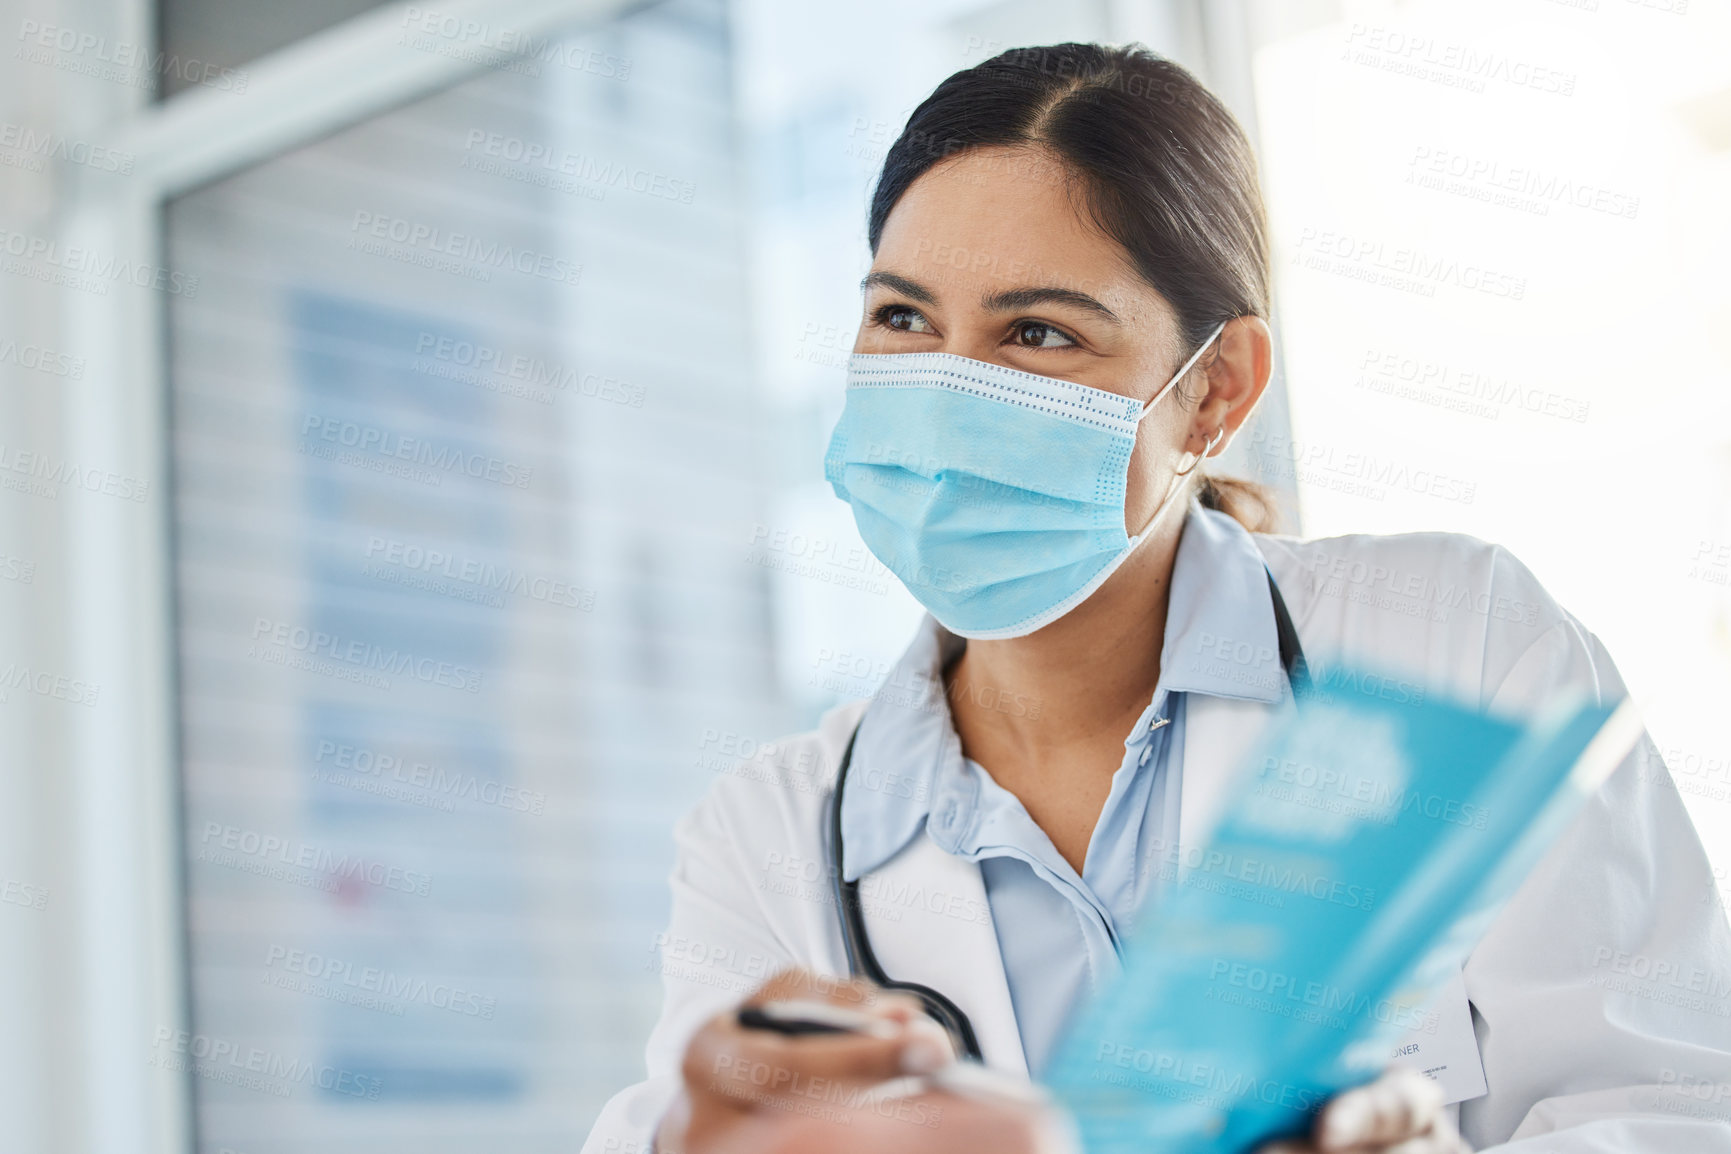 Buy stock photo Shot of doctor wearing a face mask and giving a leaflet to her patient during a consult in the clinic